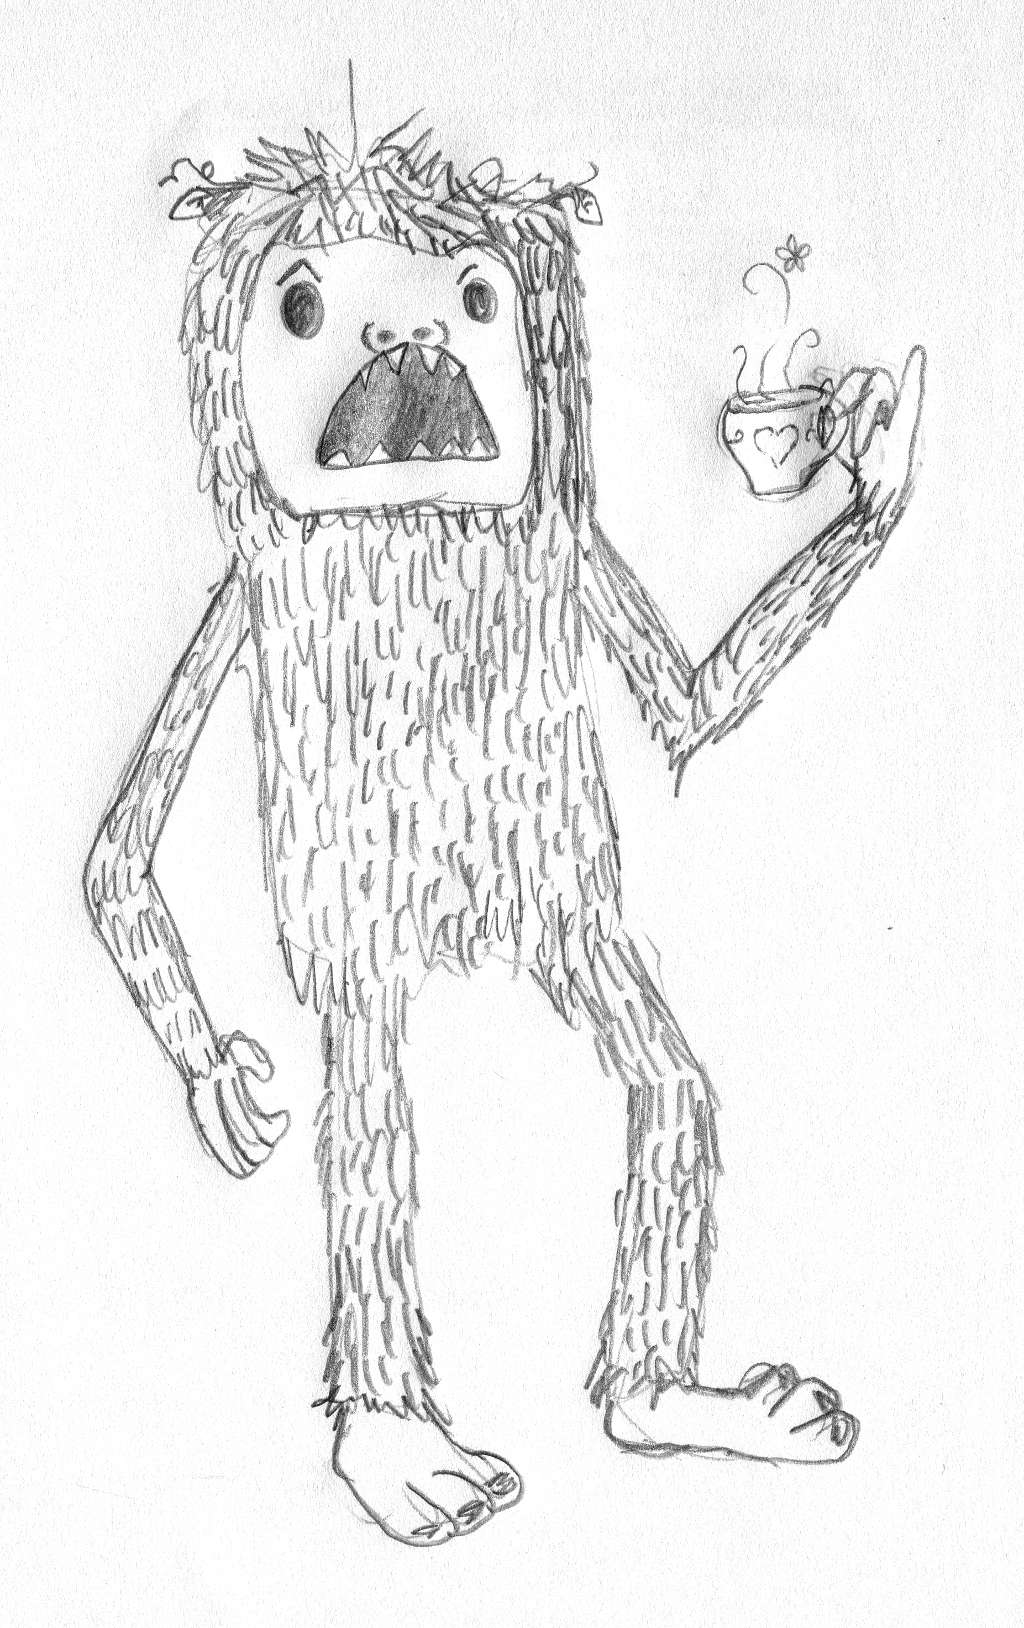 A stately sasquatch, holding a small cup of tea with its pinky finger raised